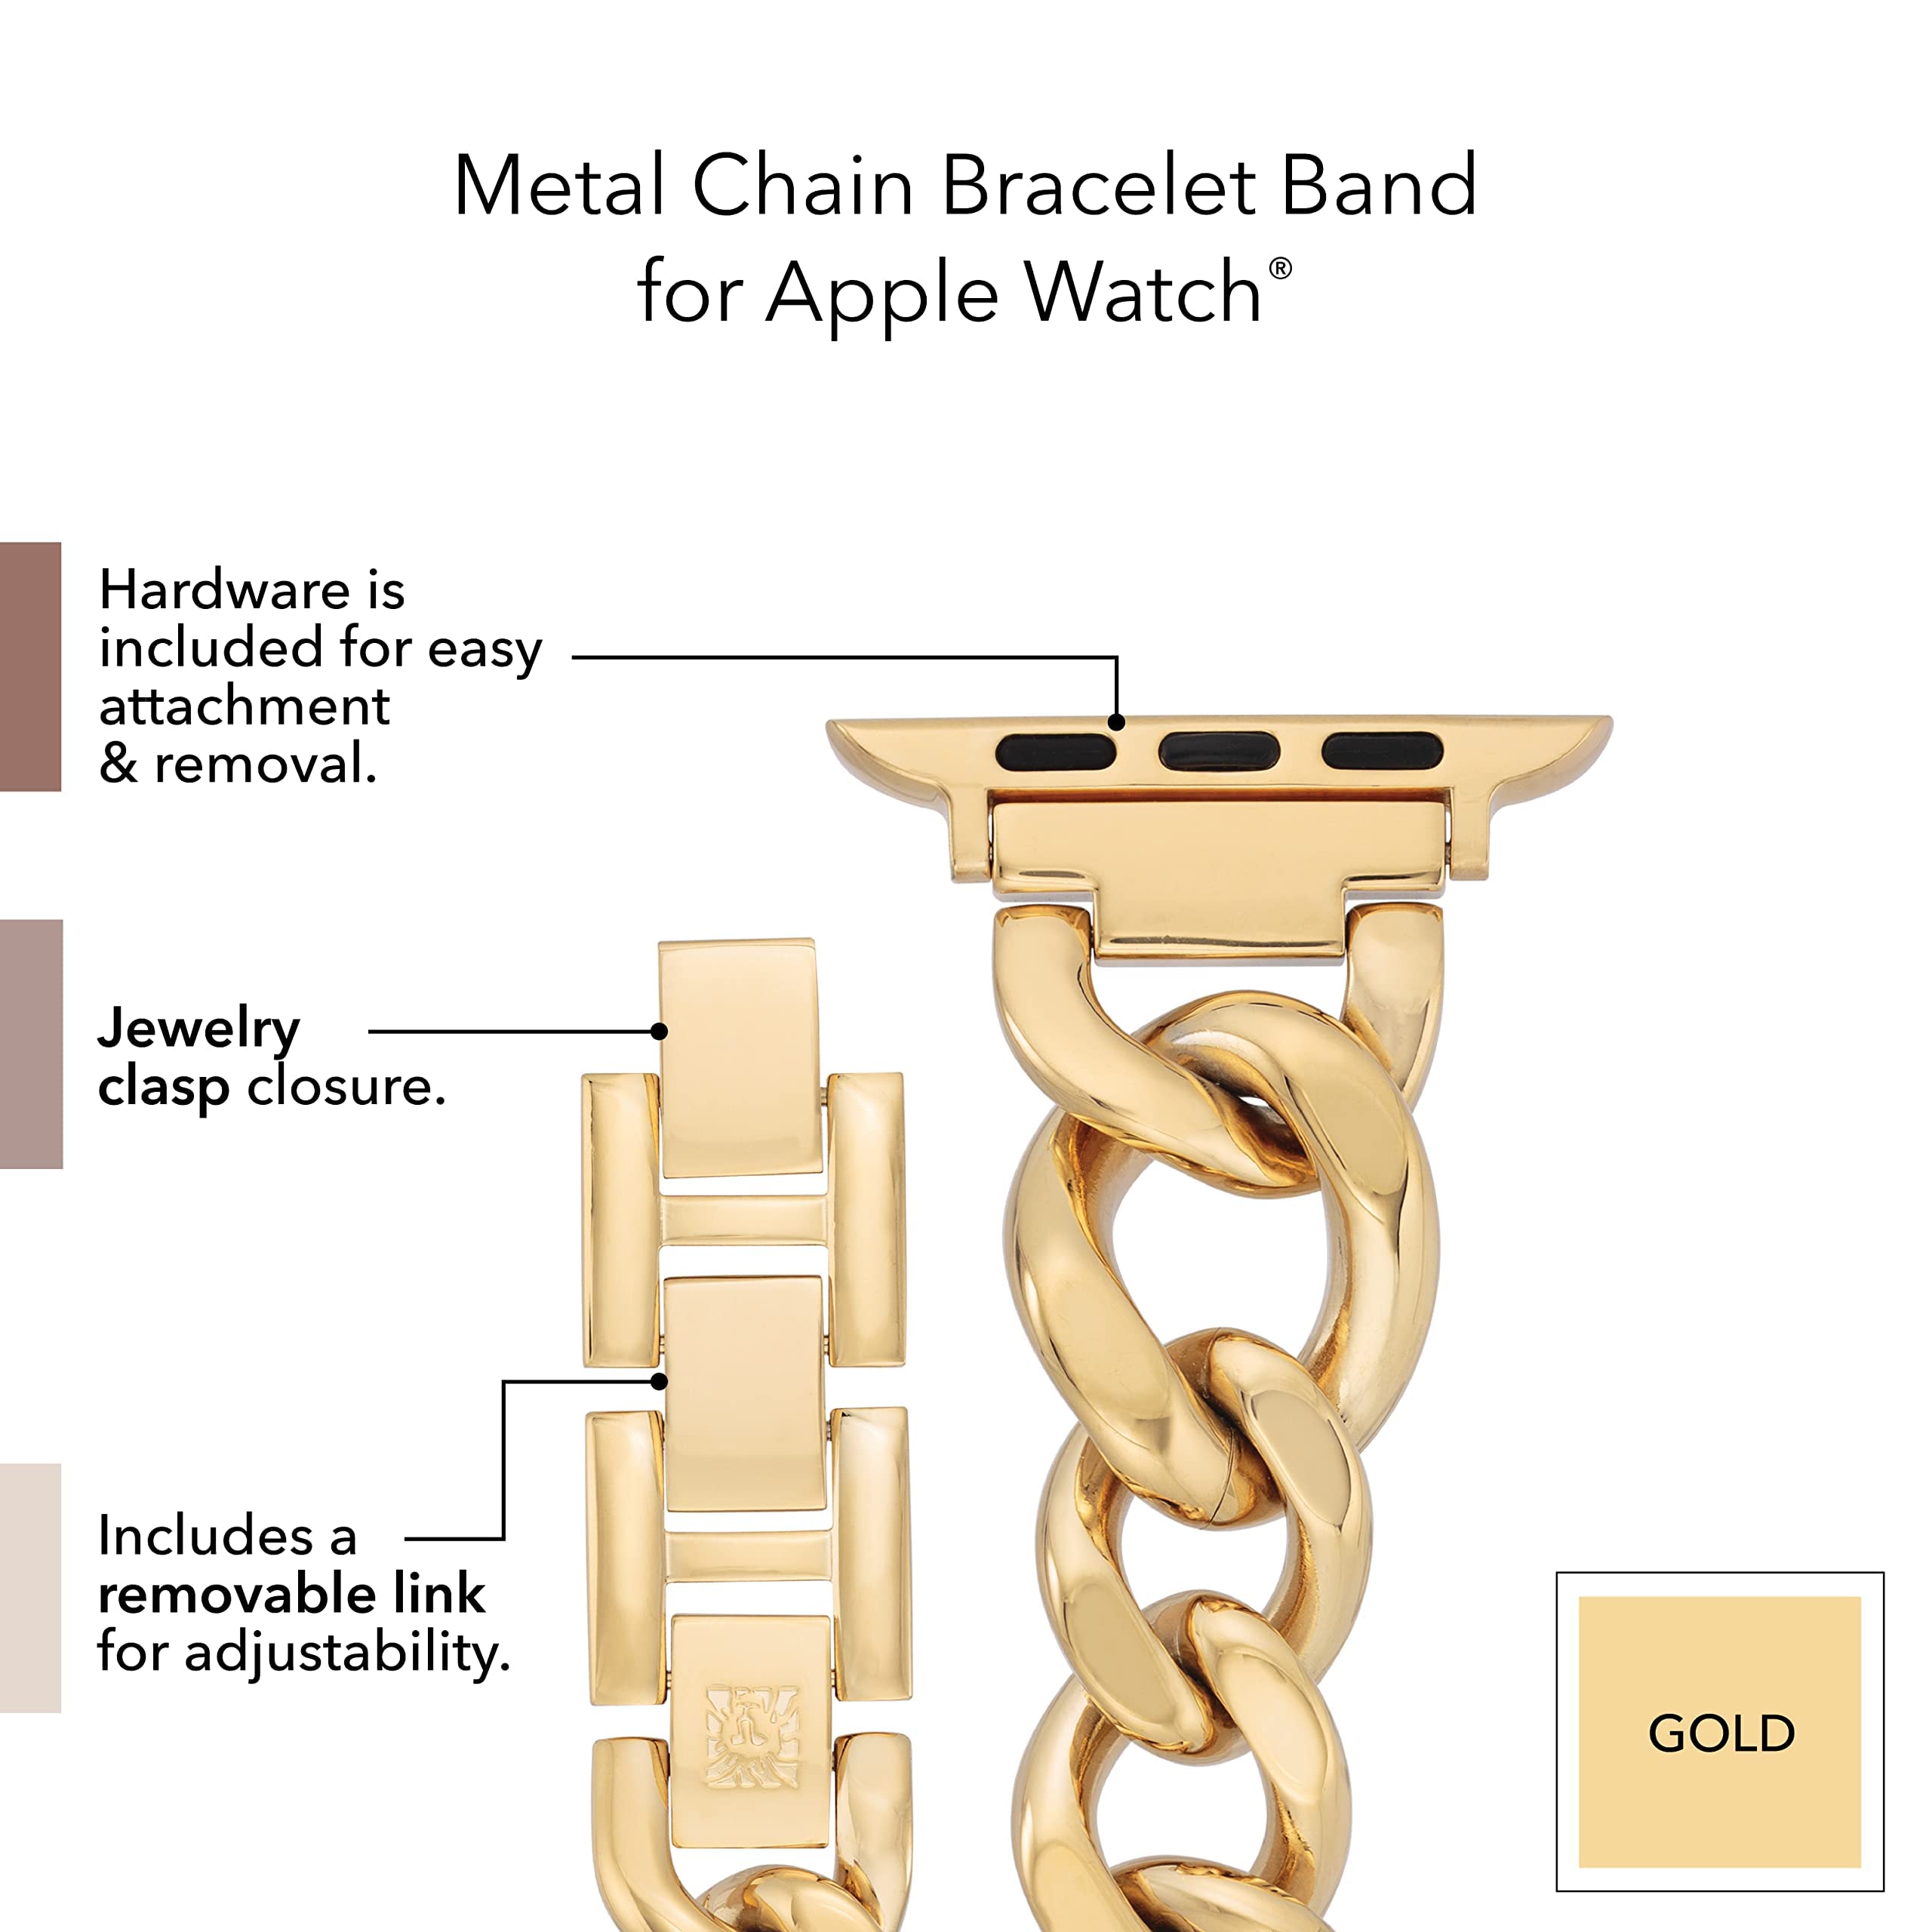 Anne Klein Fashion Chain Bracelet for Apple Watch, Secure, Adjustable, Apple Watch Replacement Band, Fits Most Wrists